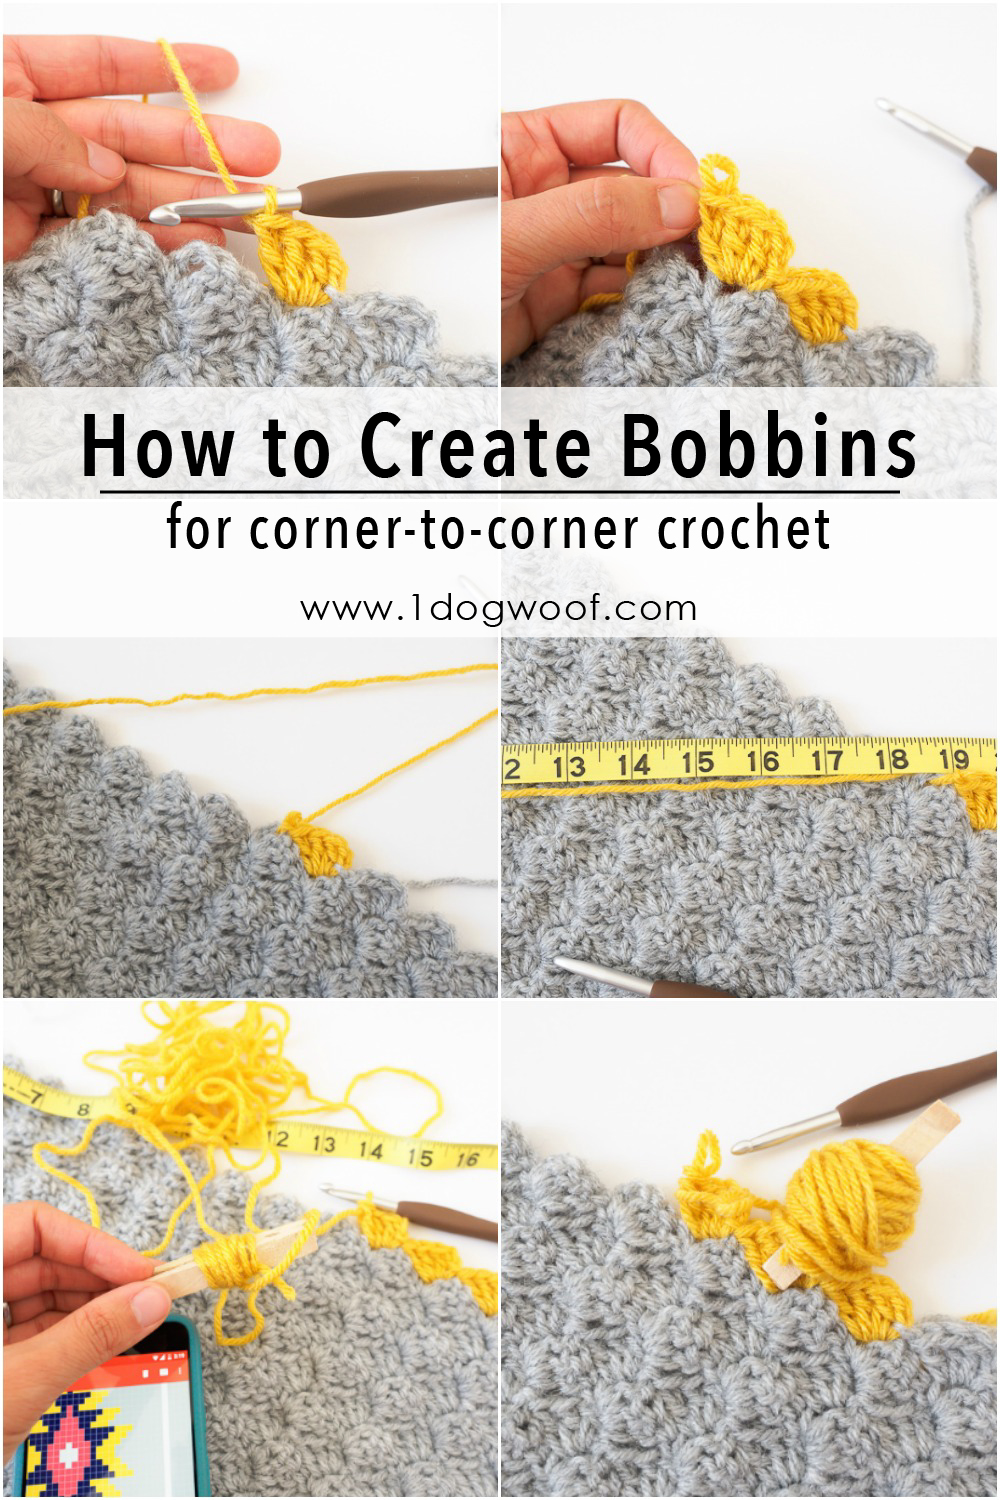 How to Create Bobbins for Small Sections of Color in corner to corner crochet